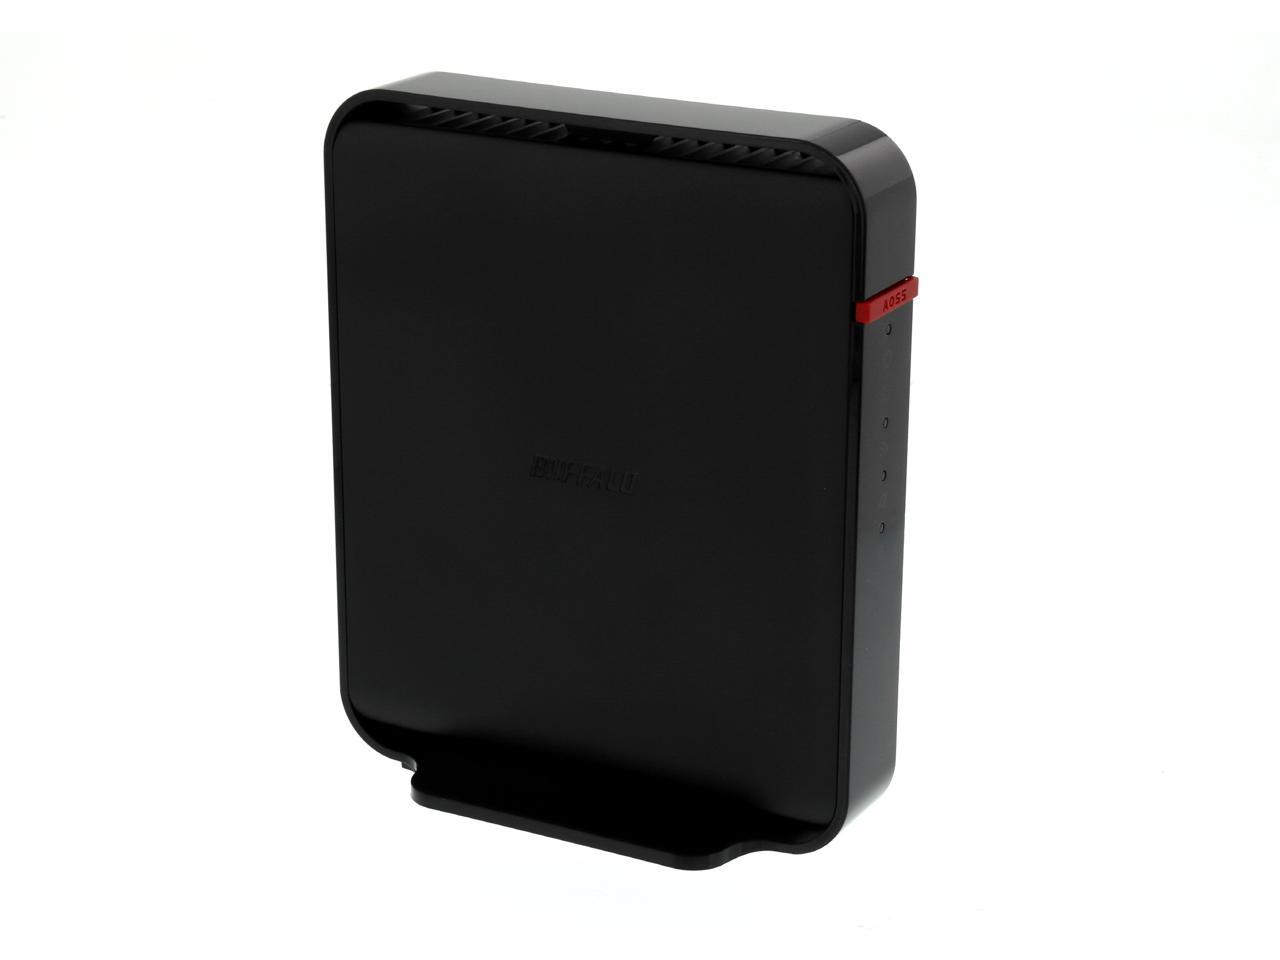 Buffalo Whr 1166d Airstation Ac 10 Ac866 N300 Dual Band Wireless Router Newegg Com